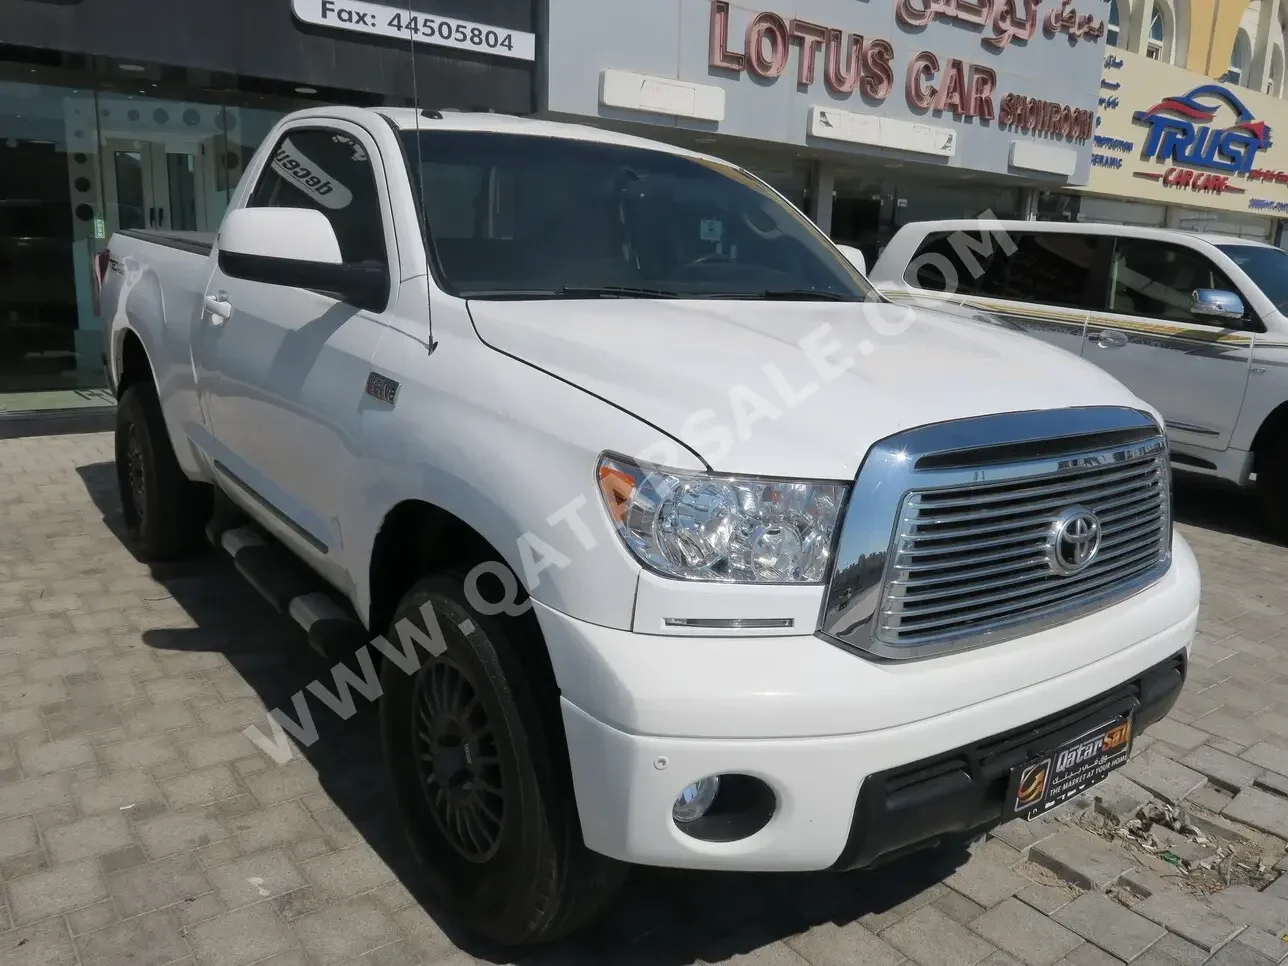  Toyota  Tundra  2013  Automatic  280,000 Km  8 Cylinder  Four Wheel Drive (4WD)  Pick Up  White  With Warranty